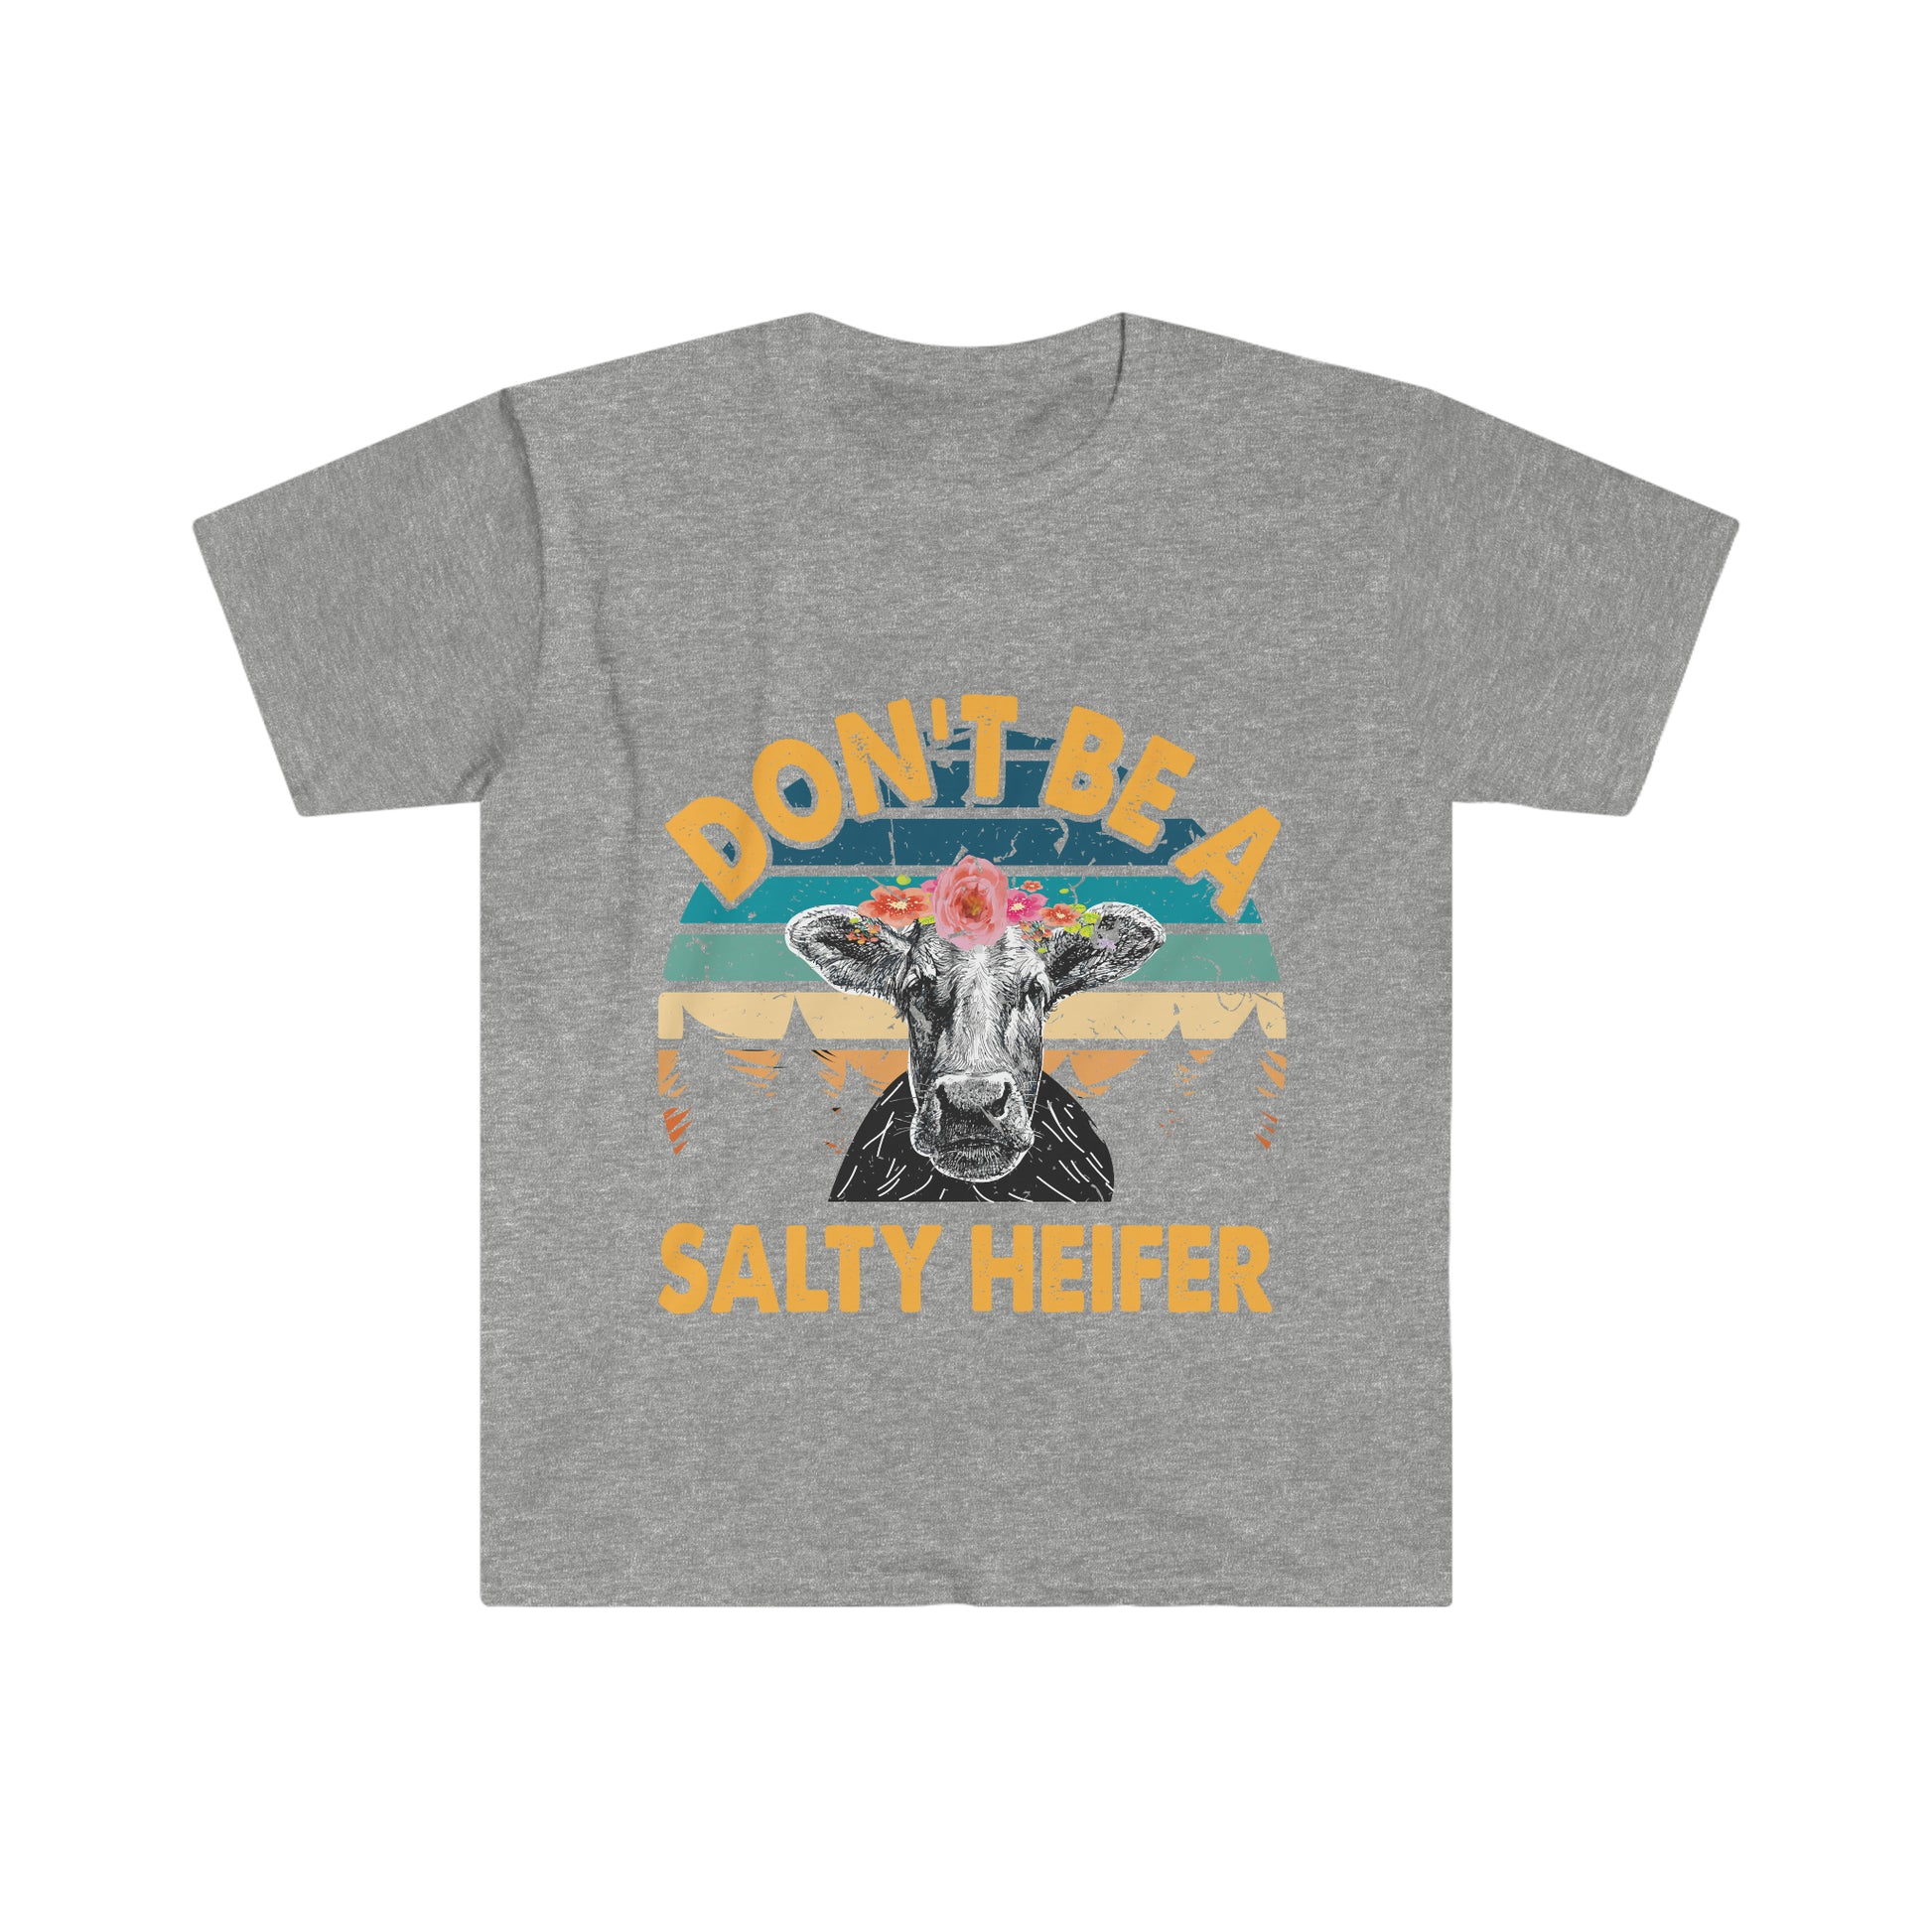 Dont be a salty heifer